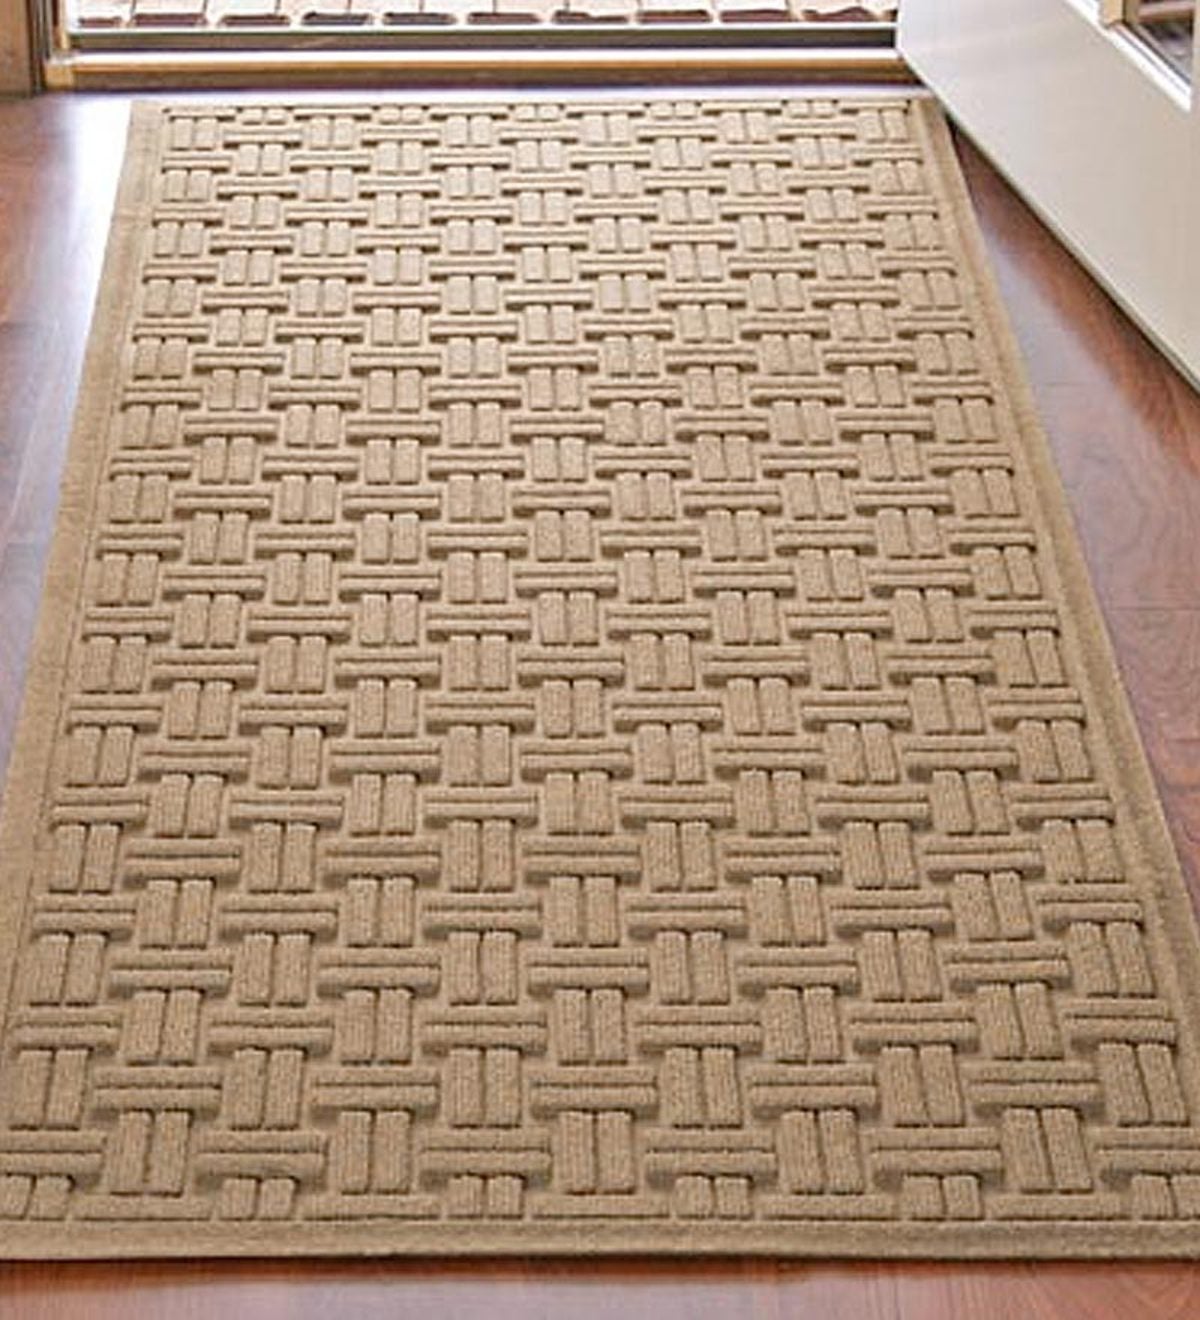 Basketweave Water Trapper Floor Mat | Bluestone | Size 2'10 | Recycled Materials